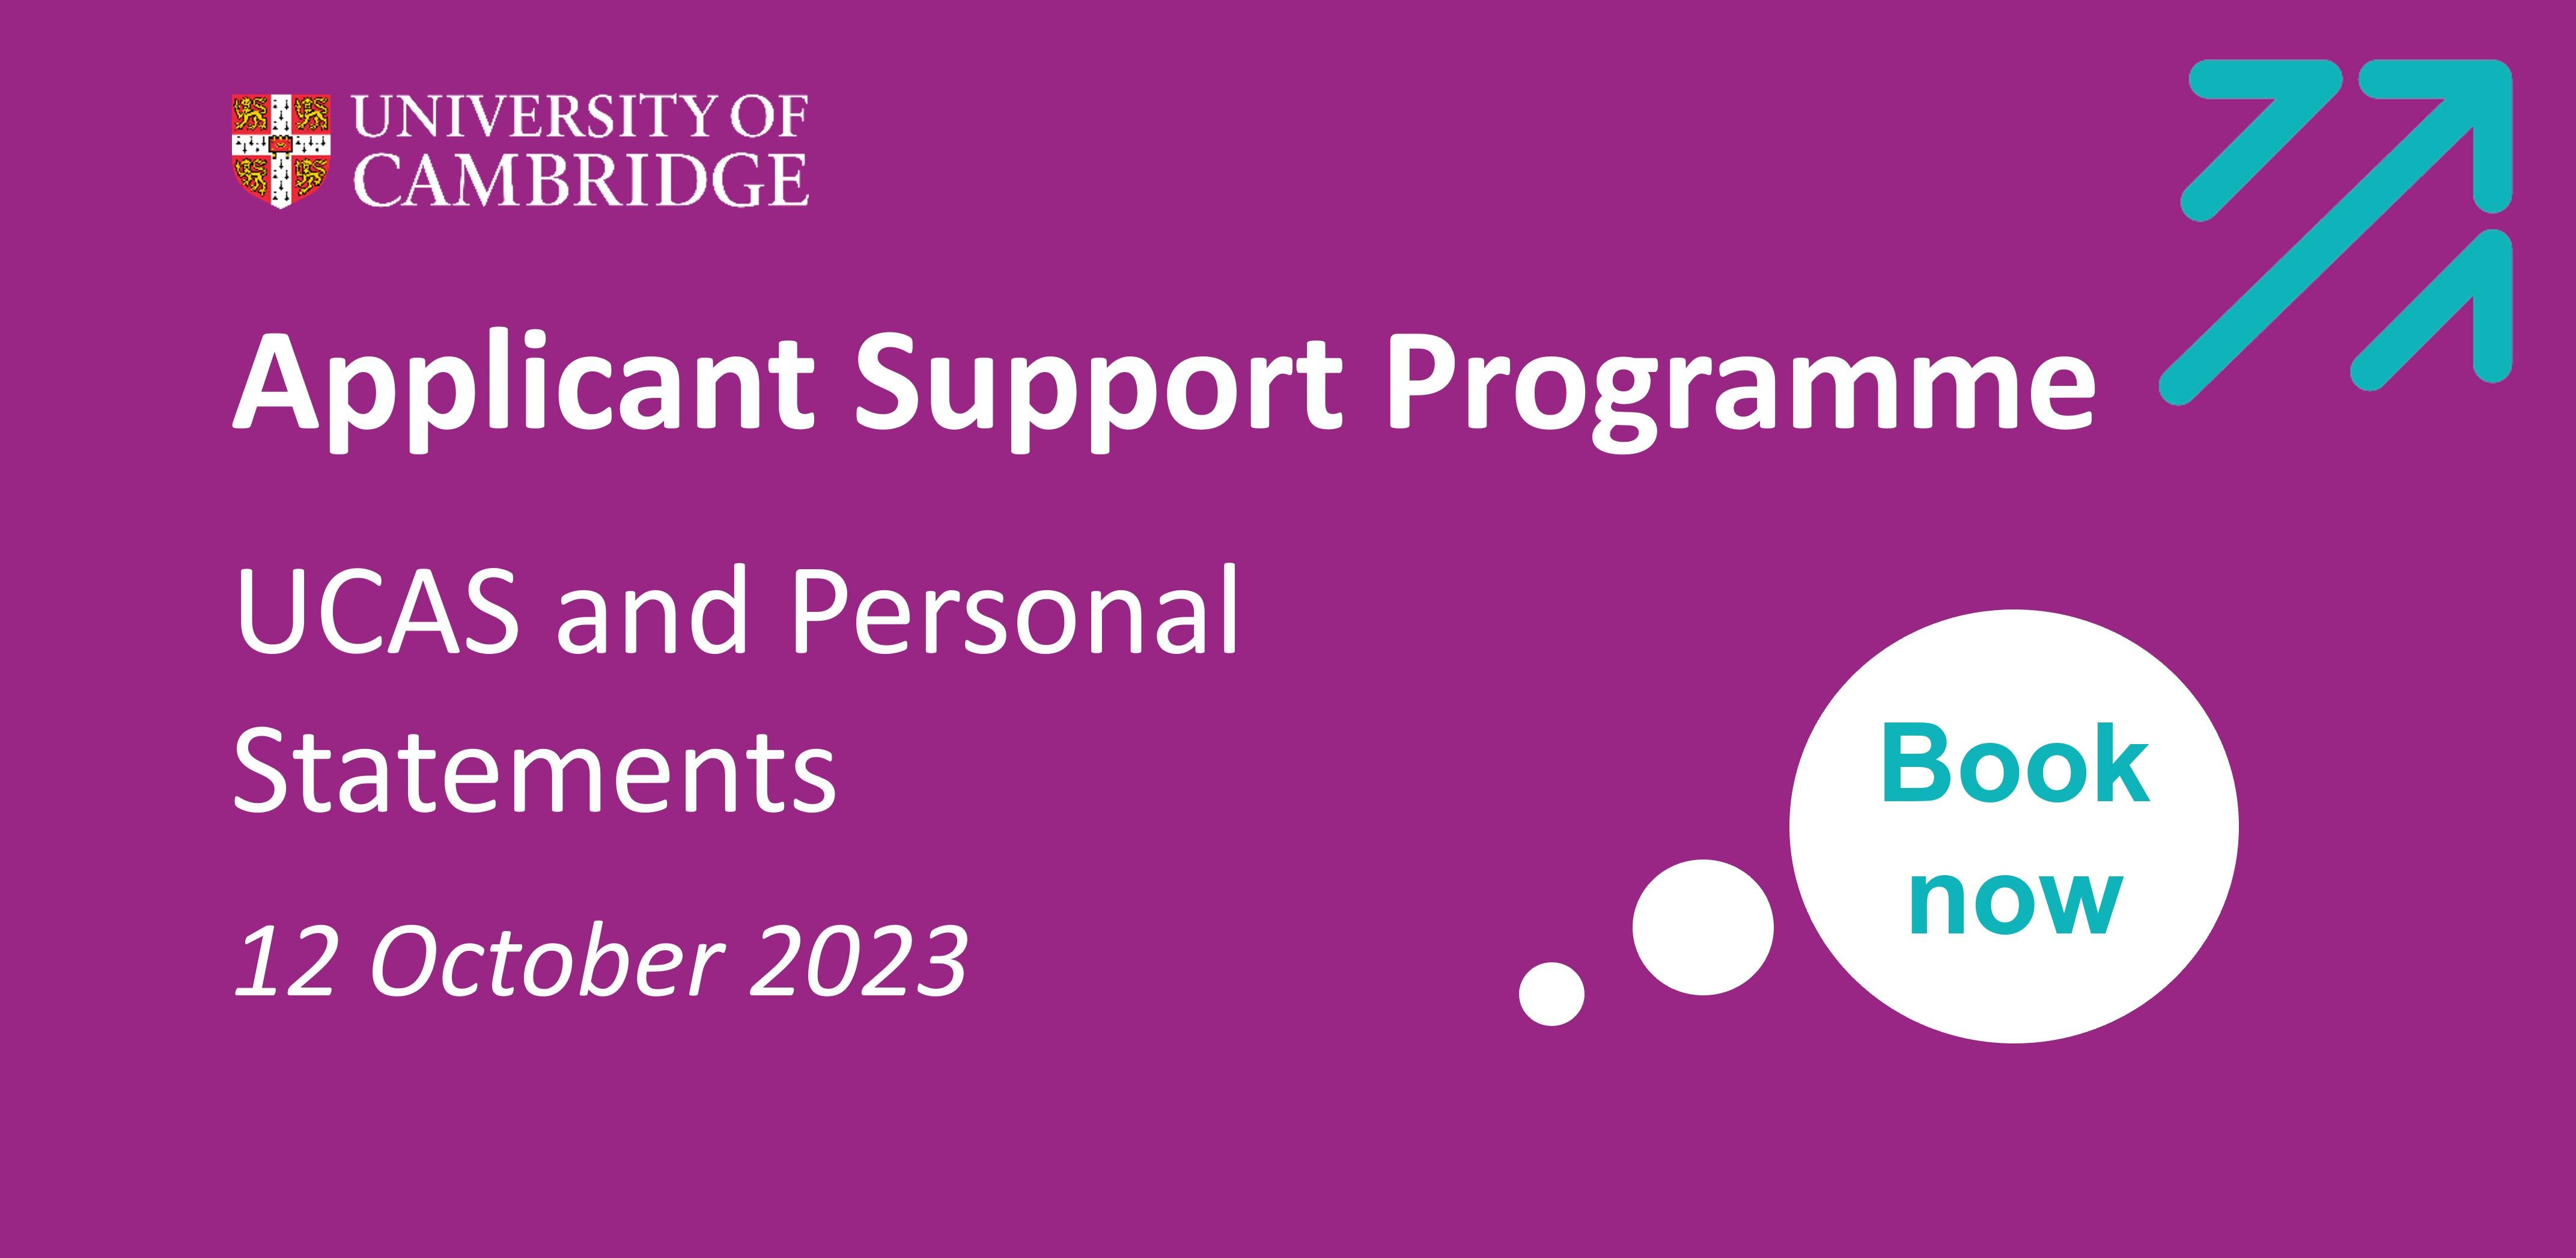 Sign up for the applicant support programme here